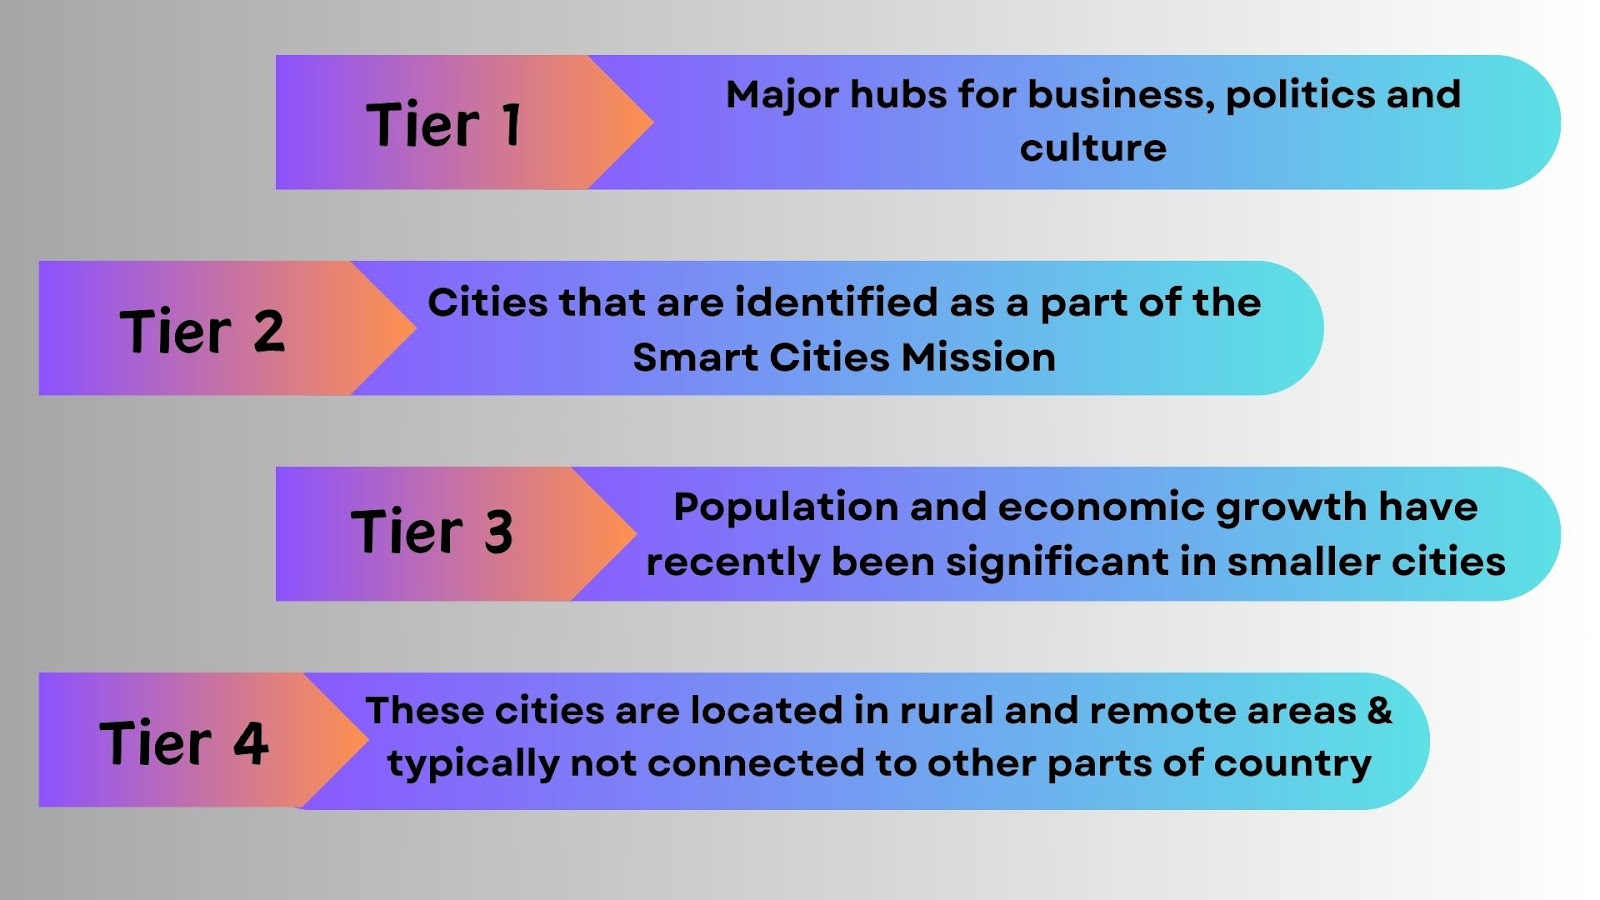 In India, the cities are divided into tiers as per the classifications given in the above image.